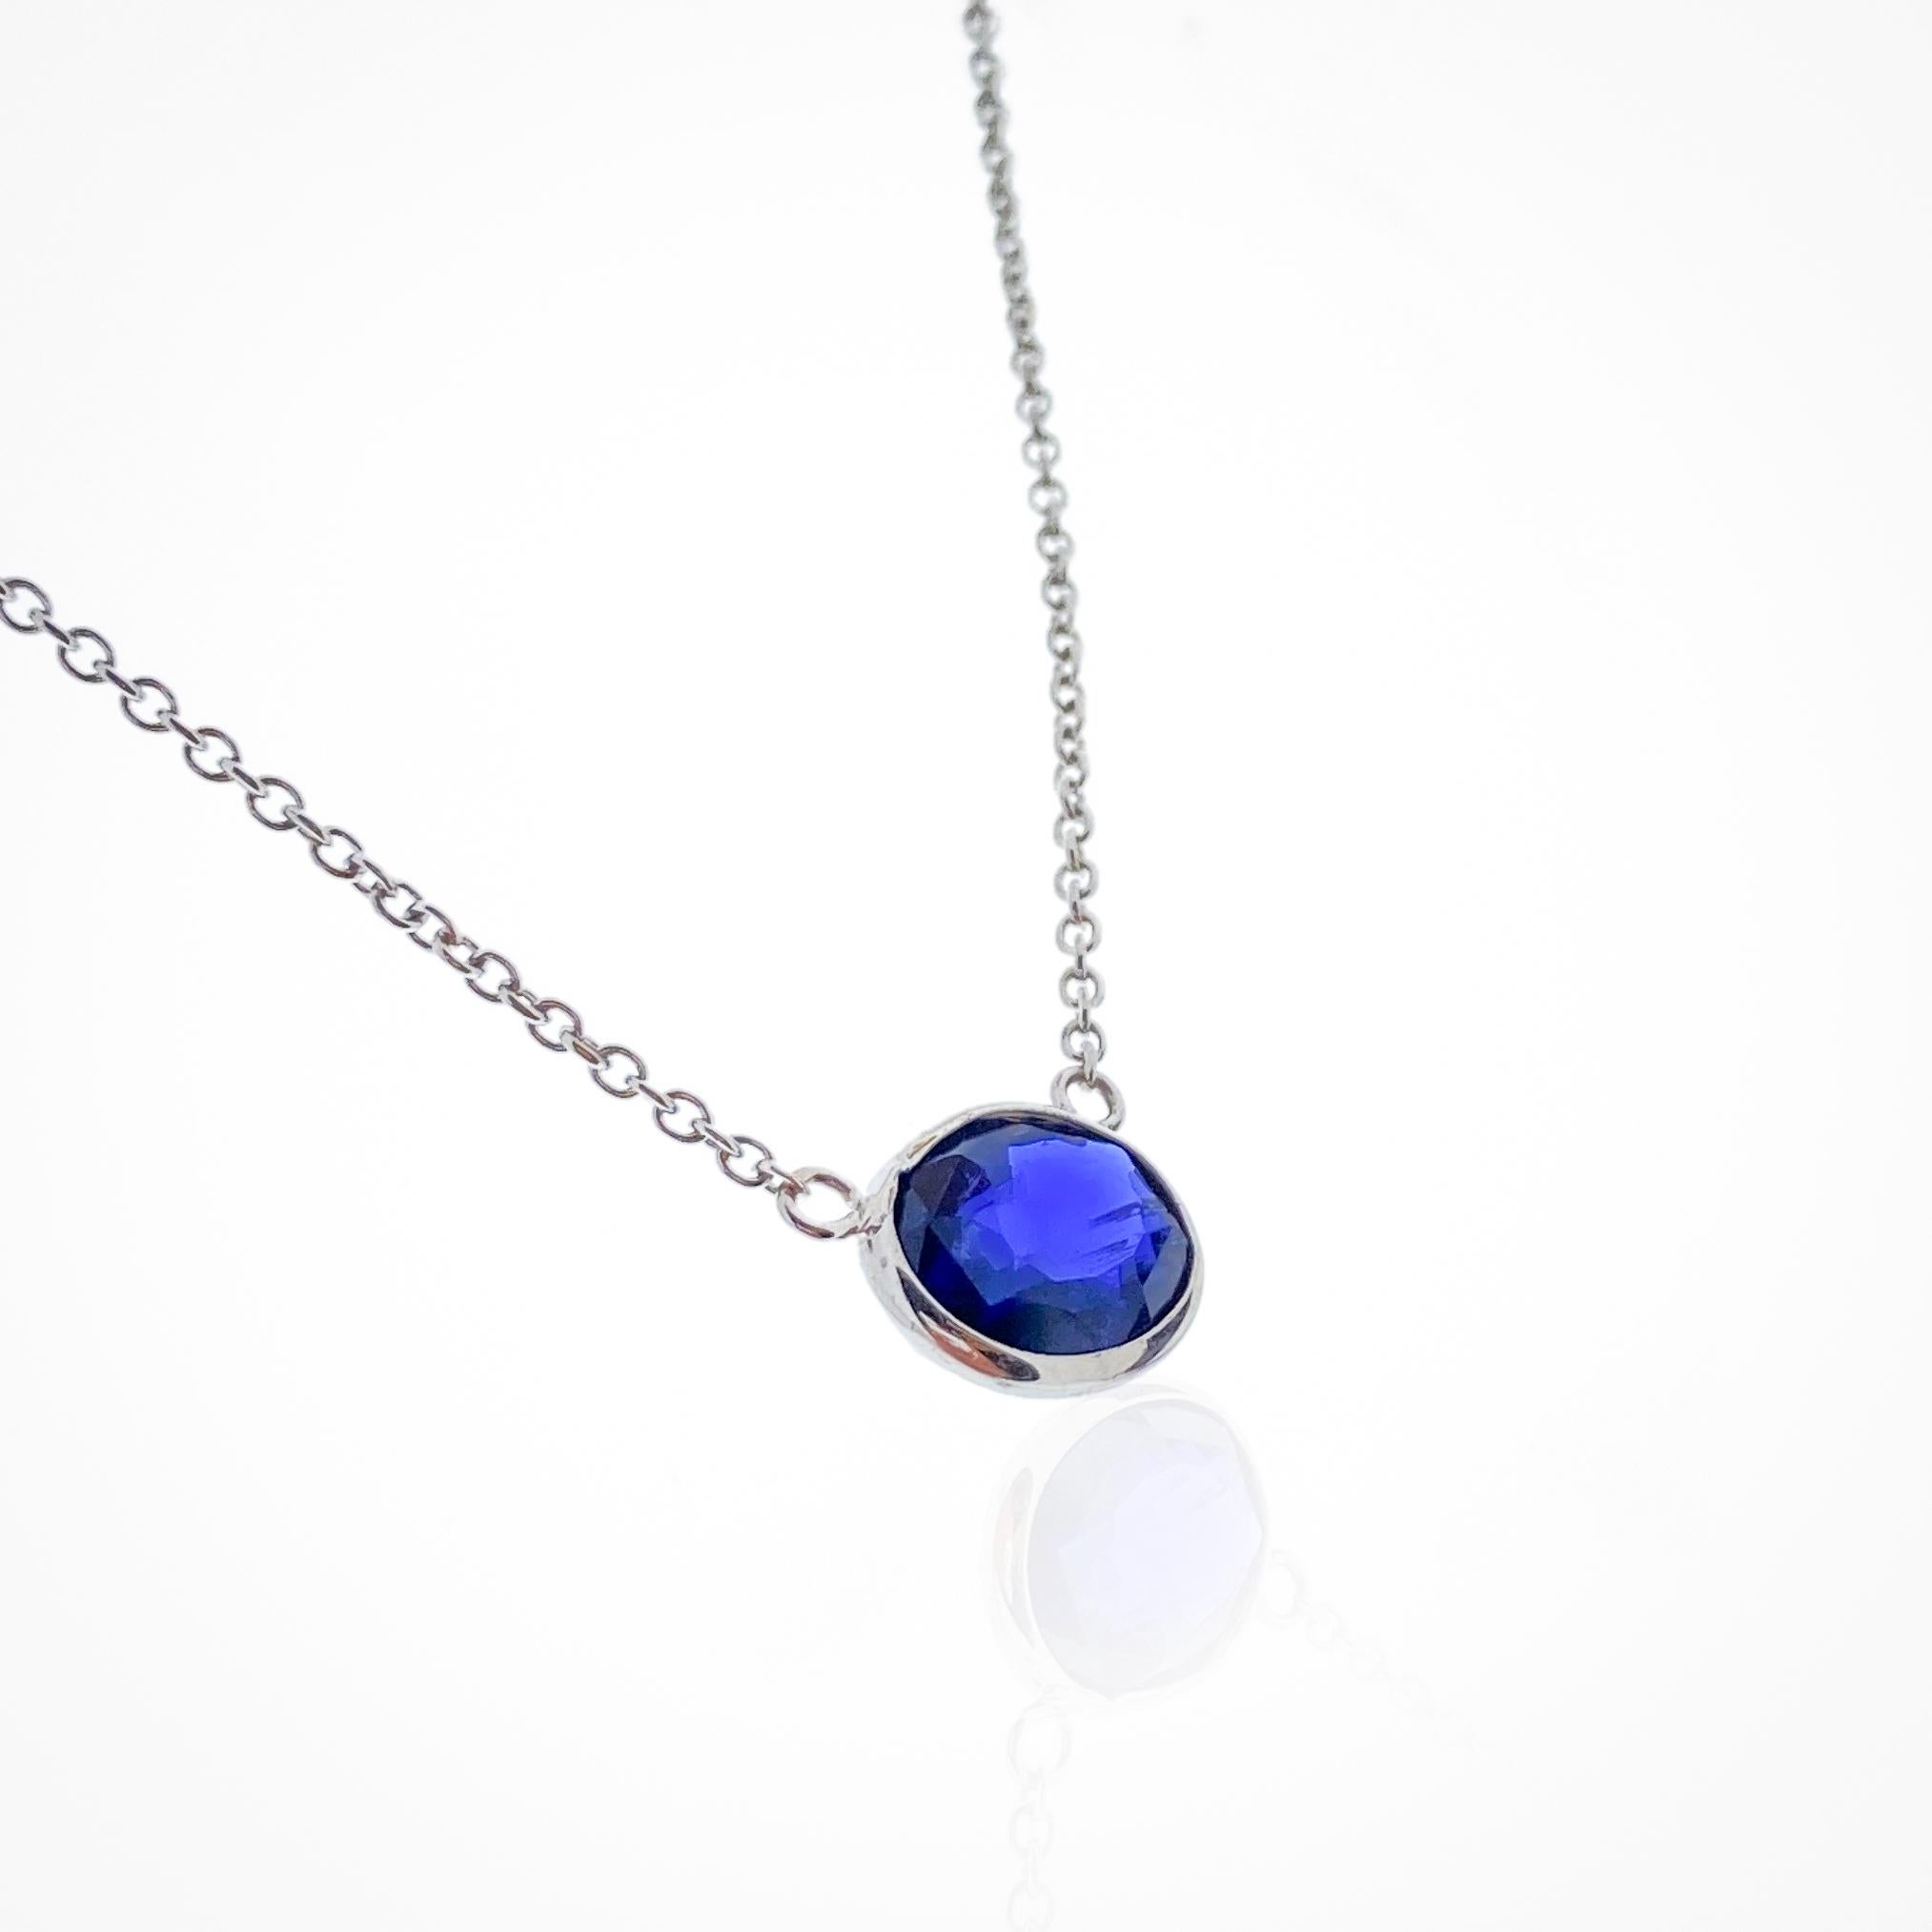 This necklace features an oval-cut blue sapphire with a weight of 2.04 carats, set in 14k white gold (WG). As previously mentioned, blue sapphires are renowned for their rich, deep blue color, and the oval cut is a timeless and elegant choice for